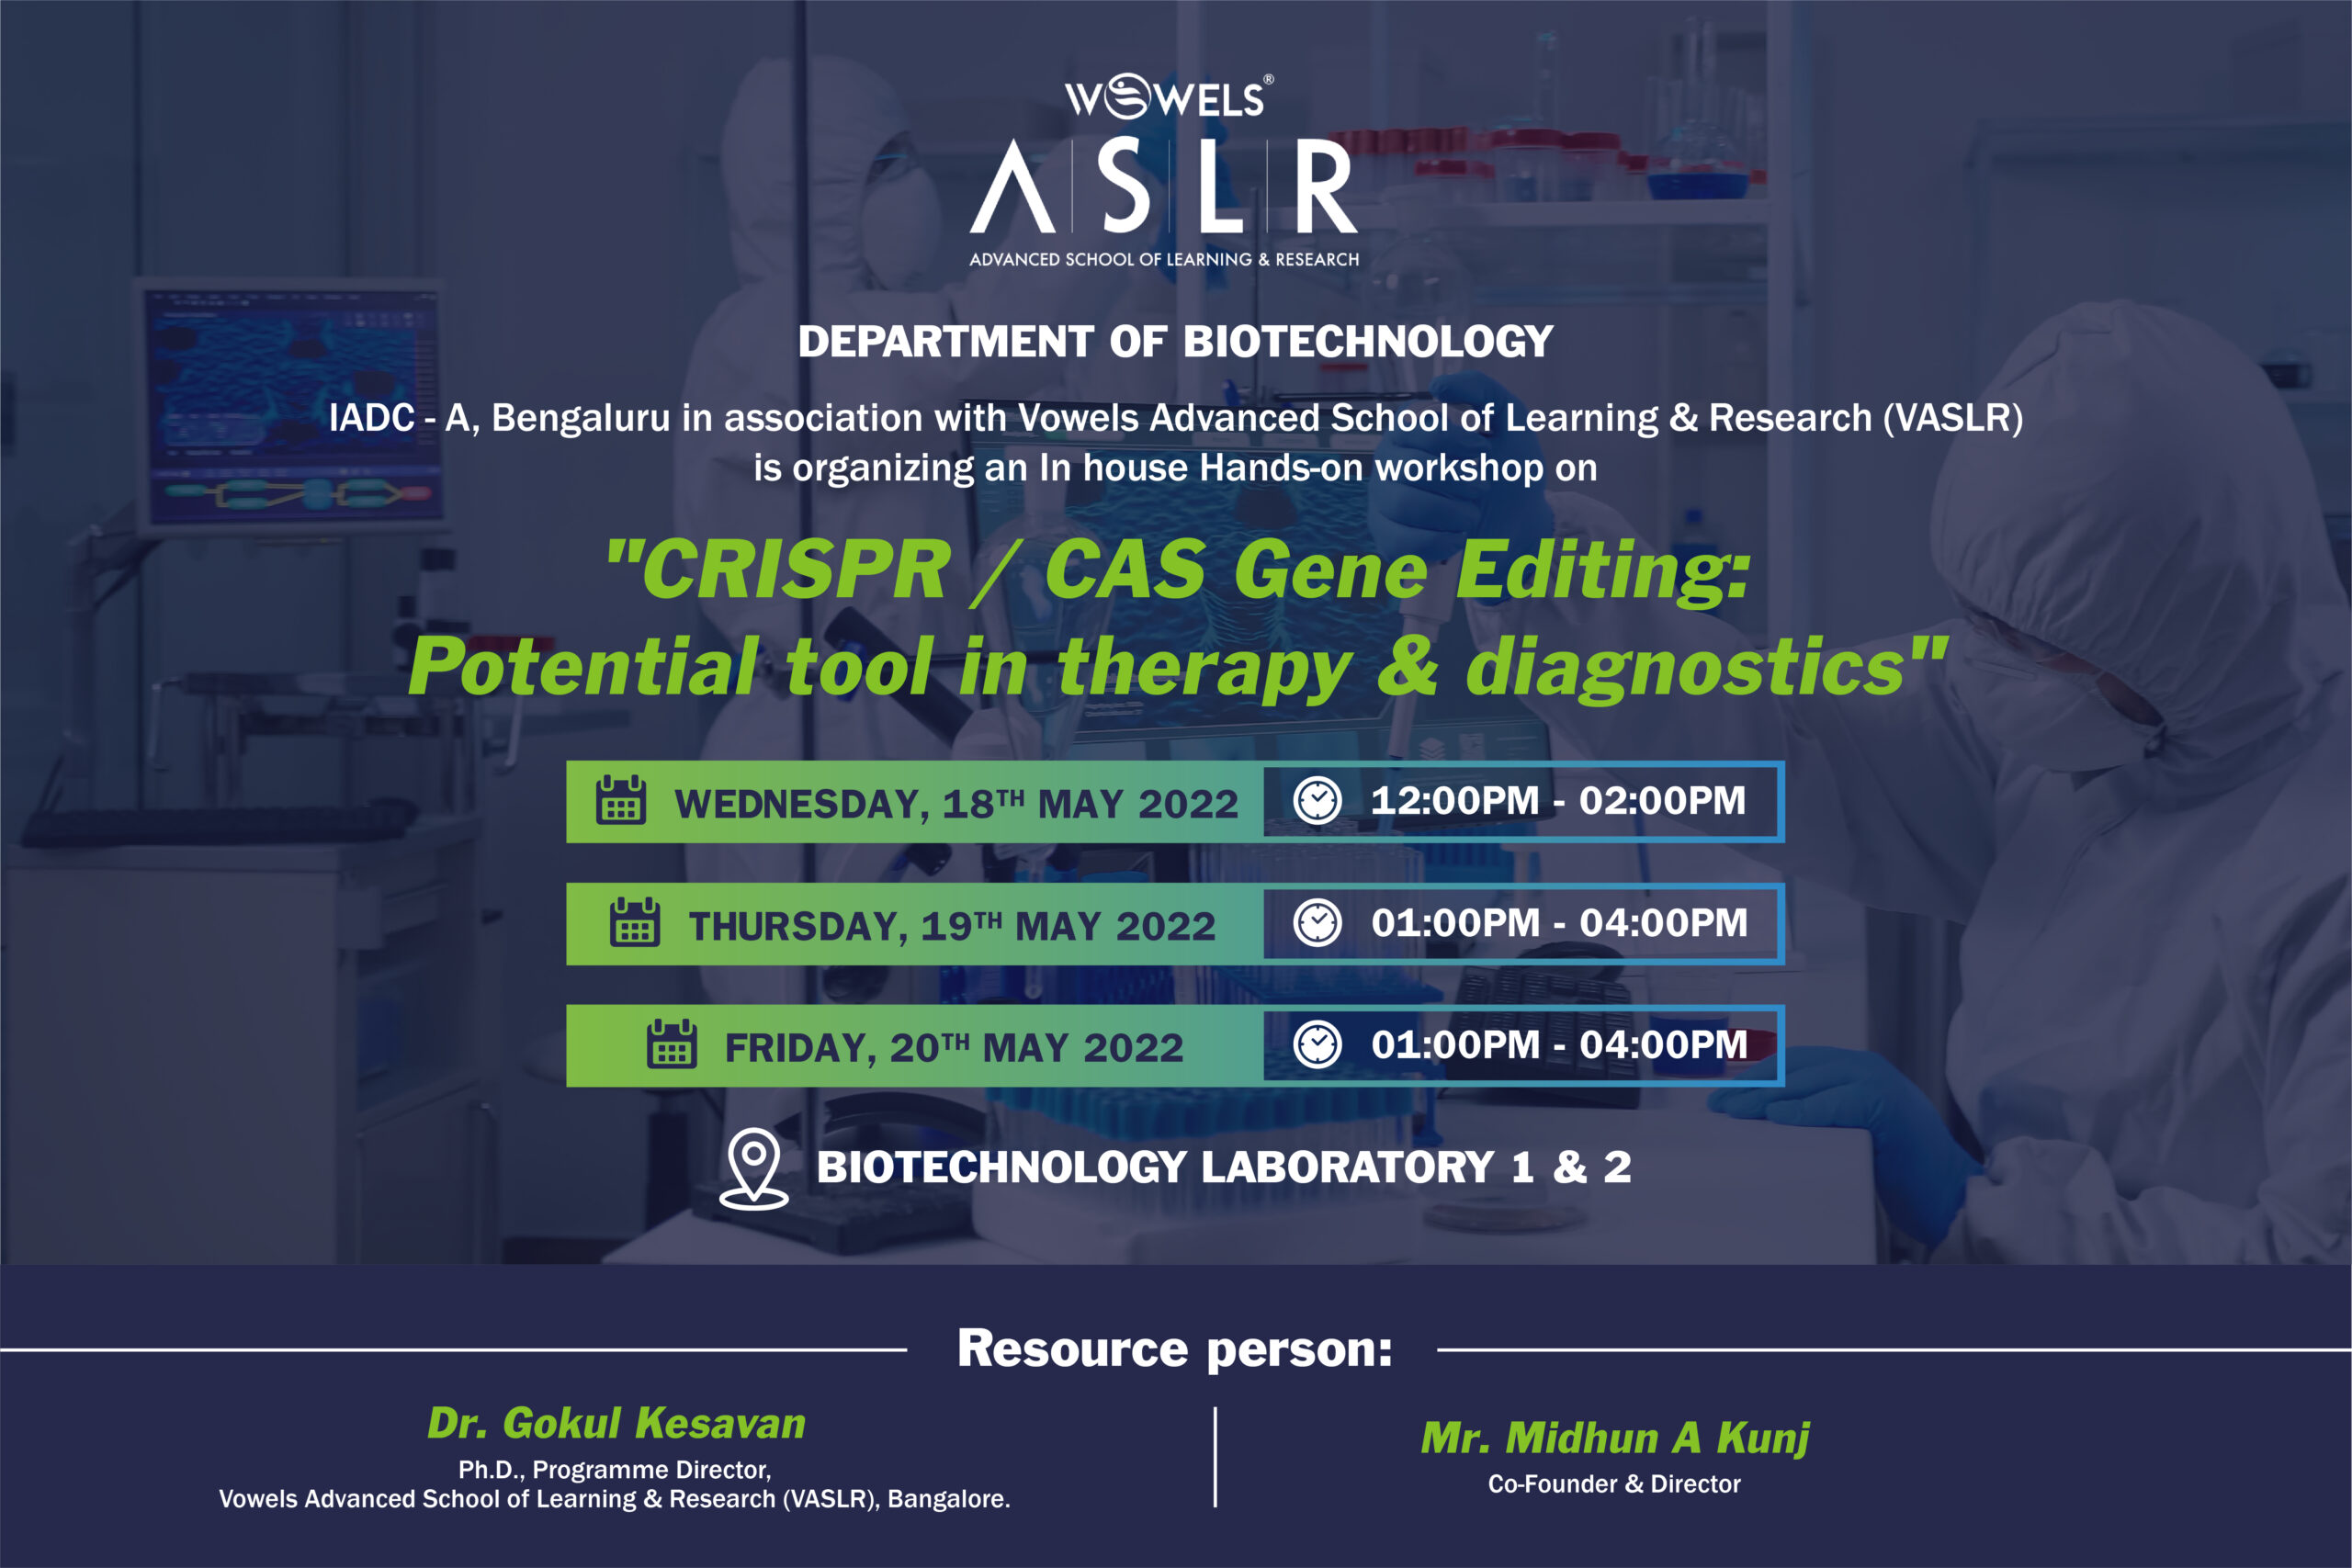 Workshop on “CRISPR/CAS Gene Editing: a potential tool in therapy & diagnostics